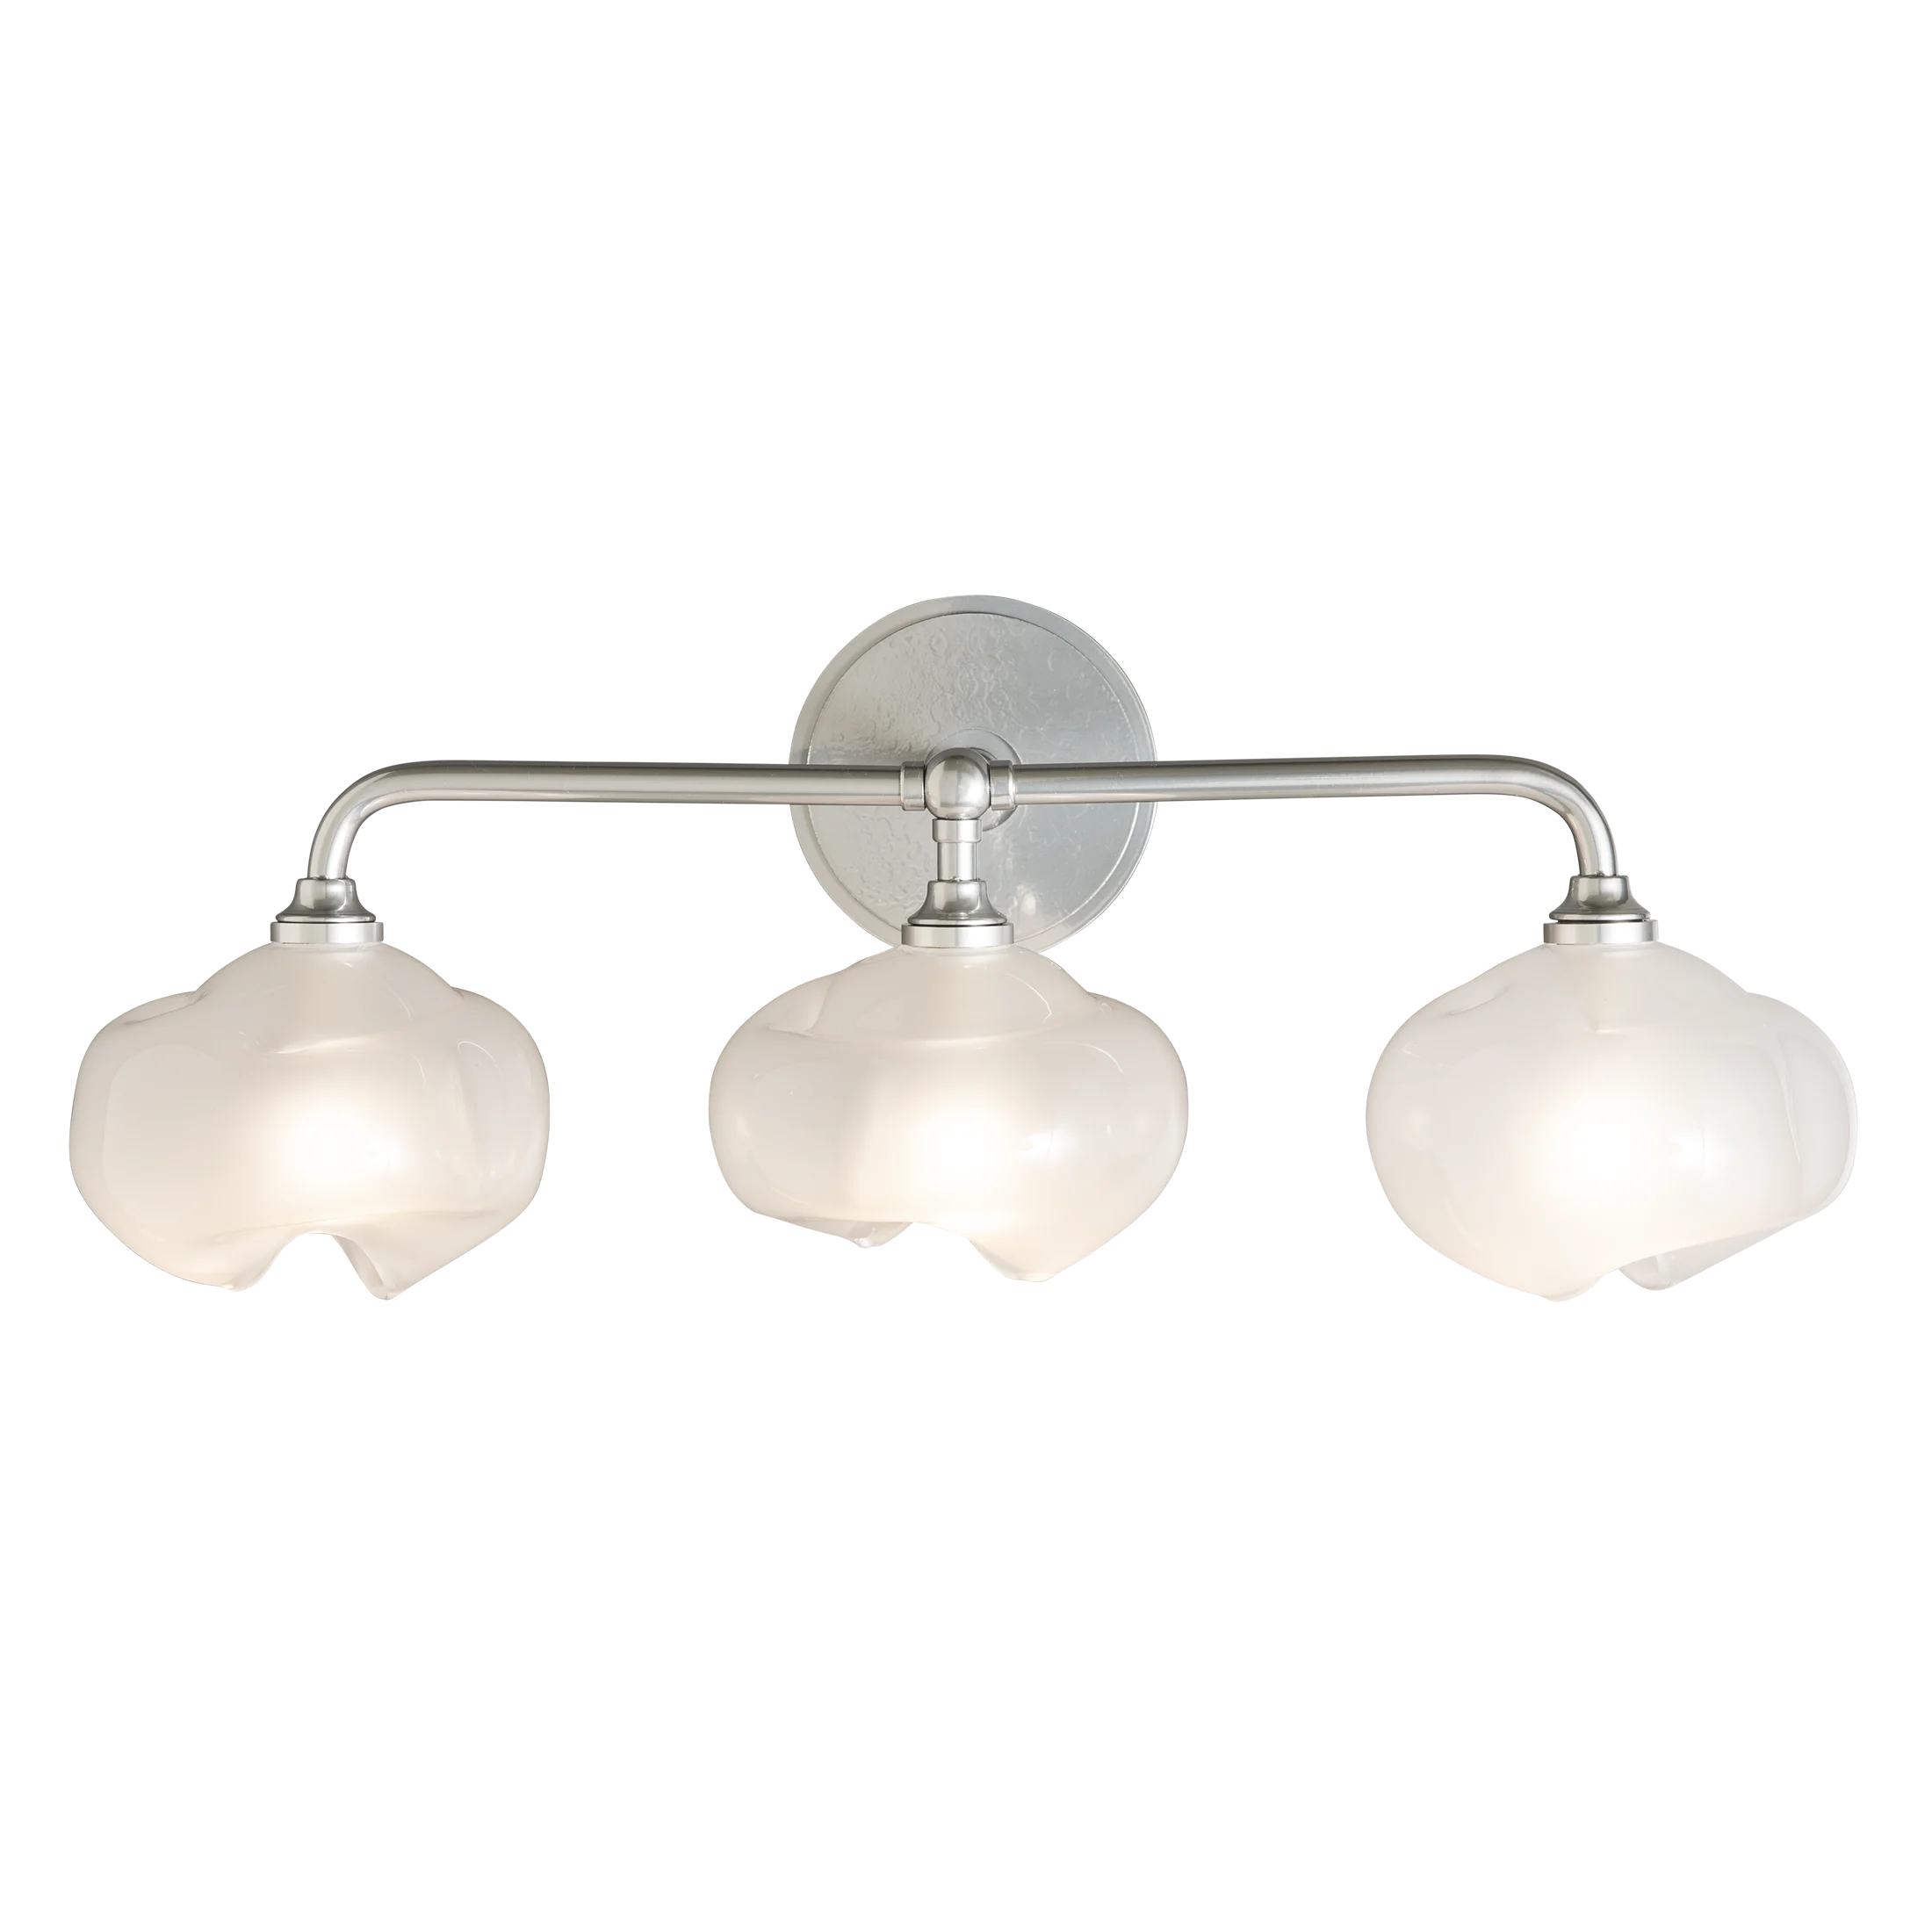 Ume 22 in. 3 Lights Vanity Light Frosted Glass